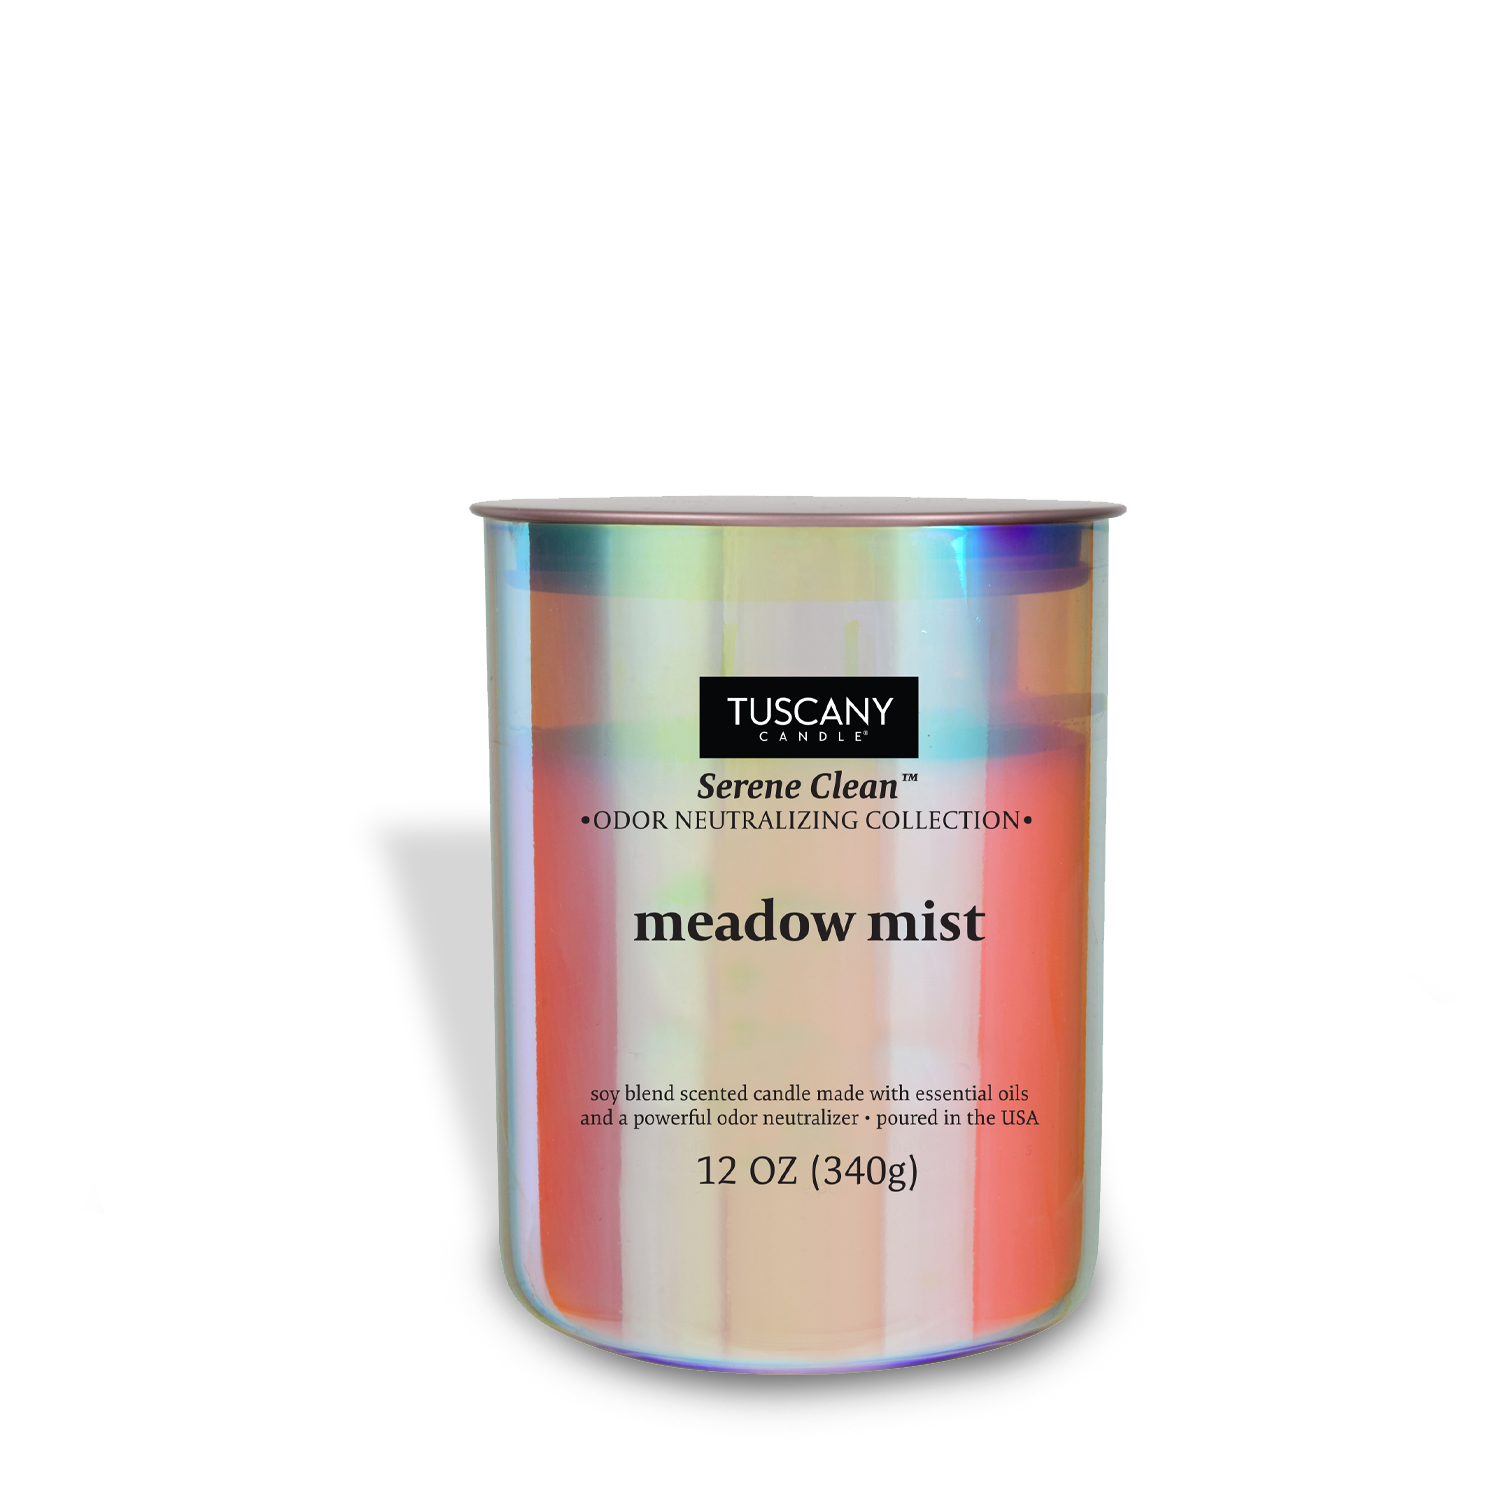 A can of Meadow Mist Scented Jar Candle (12 oz) - Serene Clean Collection by Tuscany Candle® EVD on a white background.